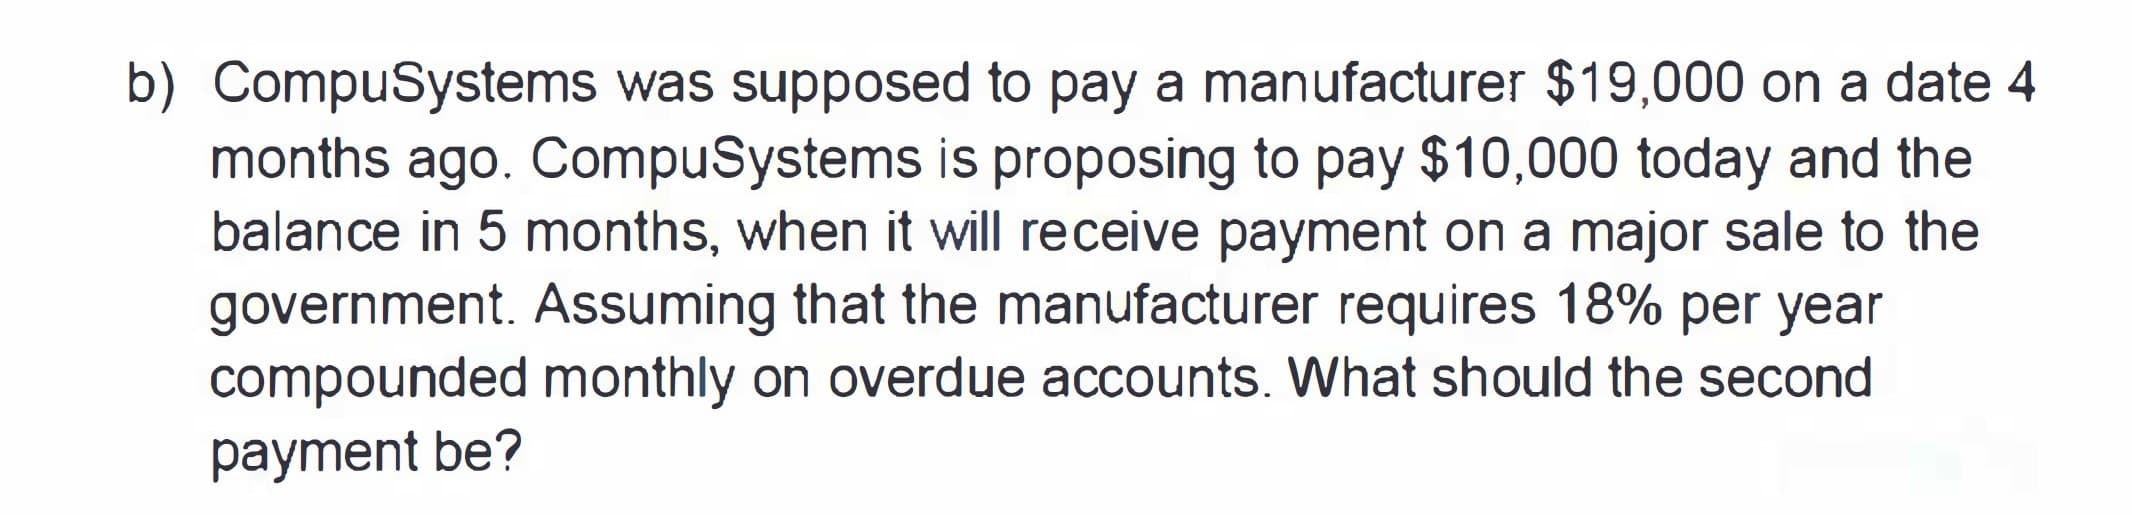 b) CompuSystems was supposed to pay a manufacturer $19,000 on a date 4
months ago. CompuSystems is proposing to pay $10,000 today and the
balance in 5 months, when it will receive payment on a major sale to the
government. Assuming that the manufacturer requires 18% per year
compounded monthly on overdue accounts. What should the second
payment be?
